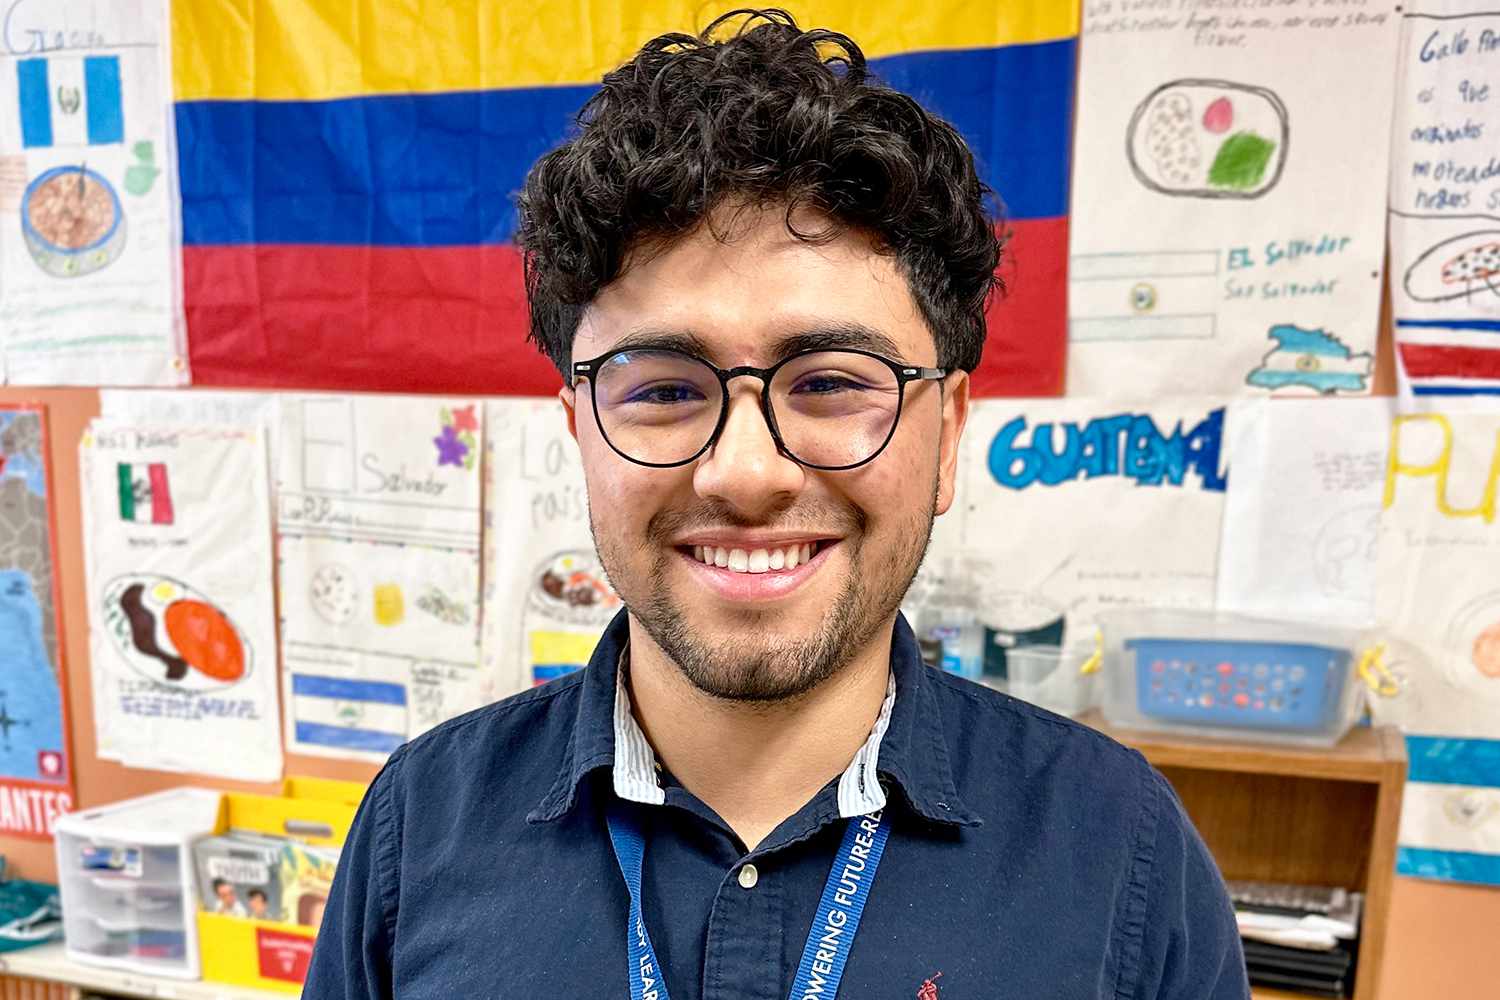 Colombian Teacher Is Making a Difference in Texas – and Teared Up After Student Said He ‘Wanted to Be Like Me’